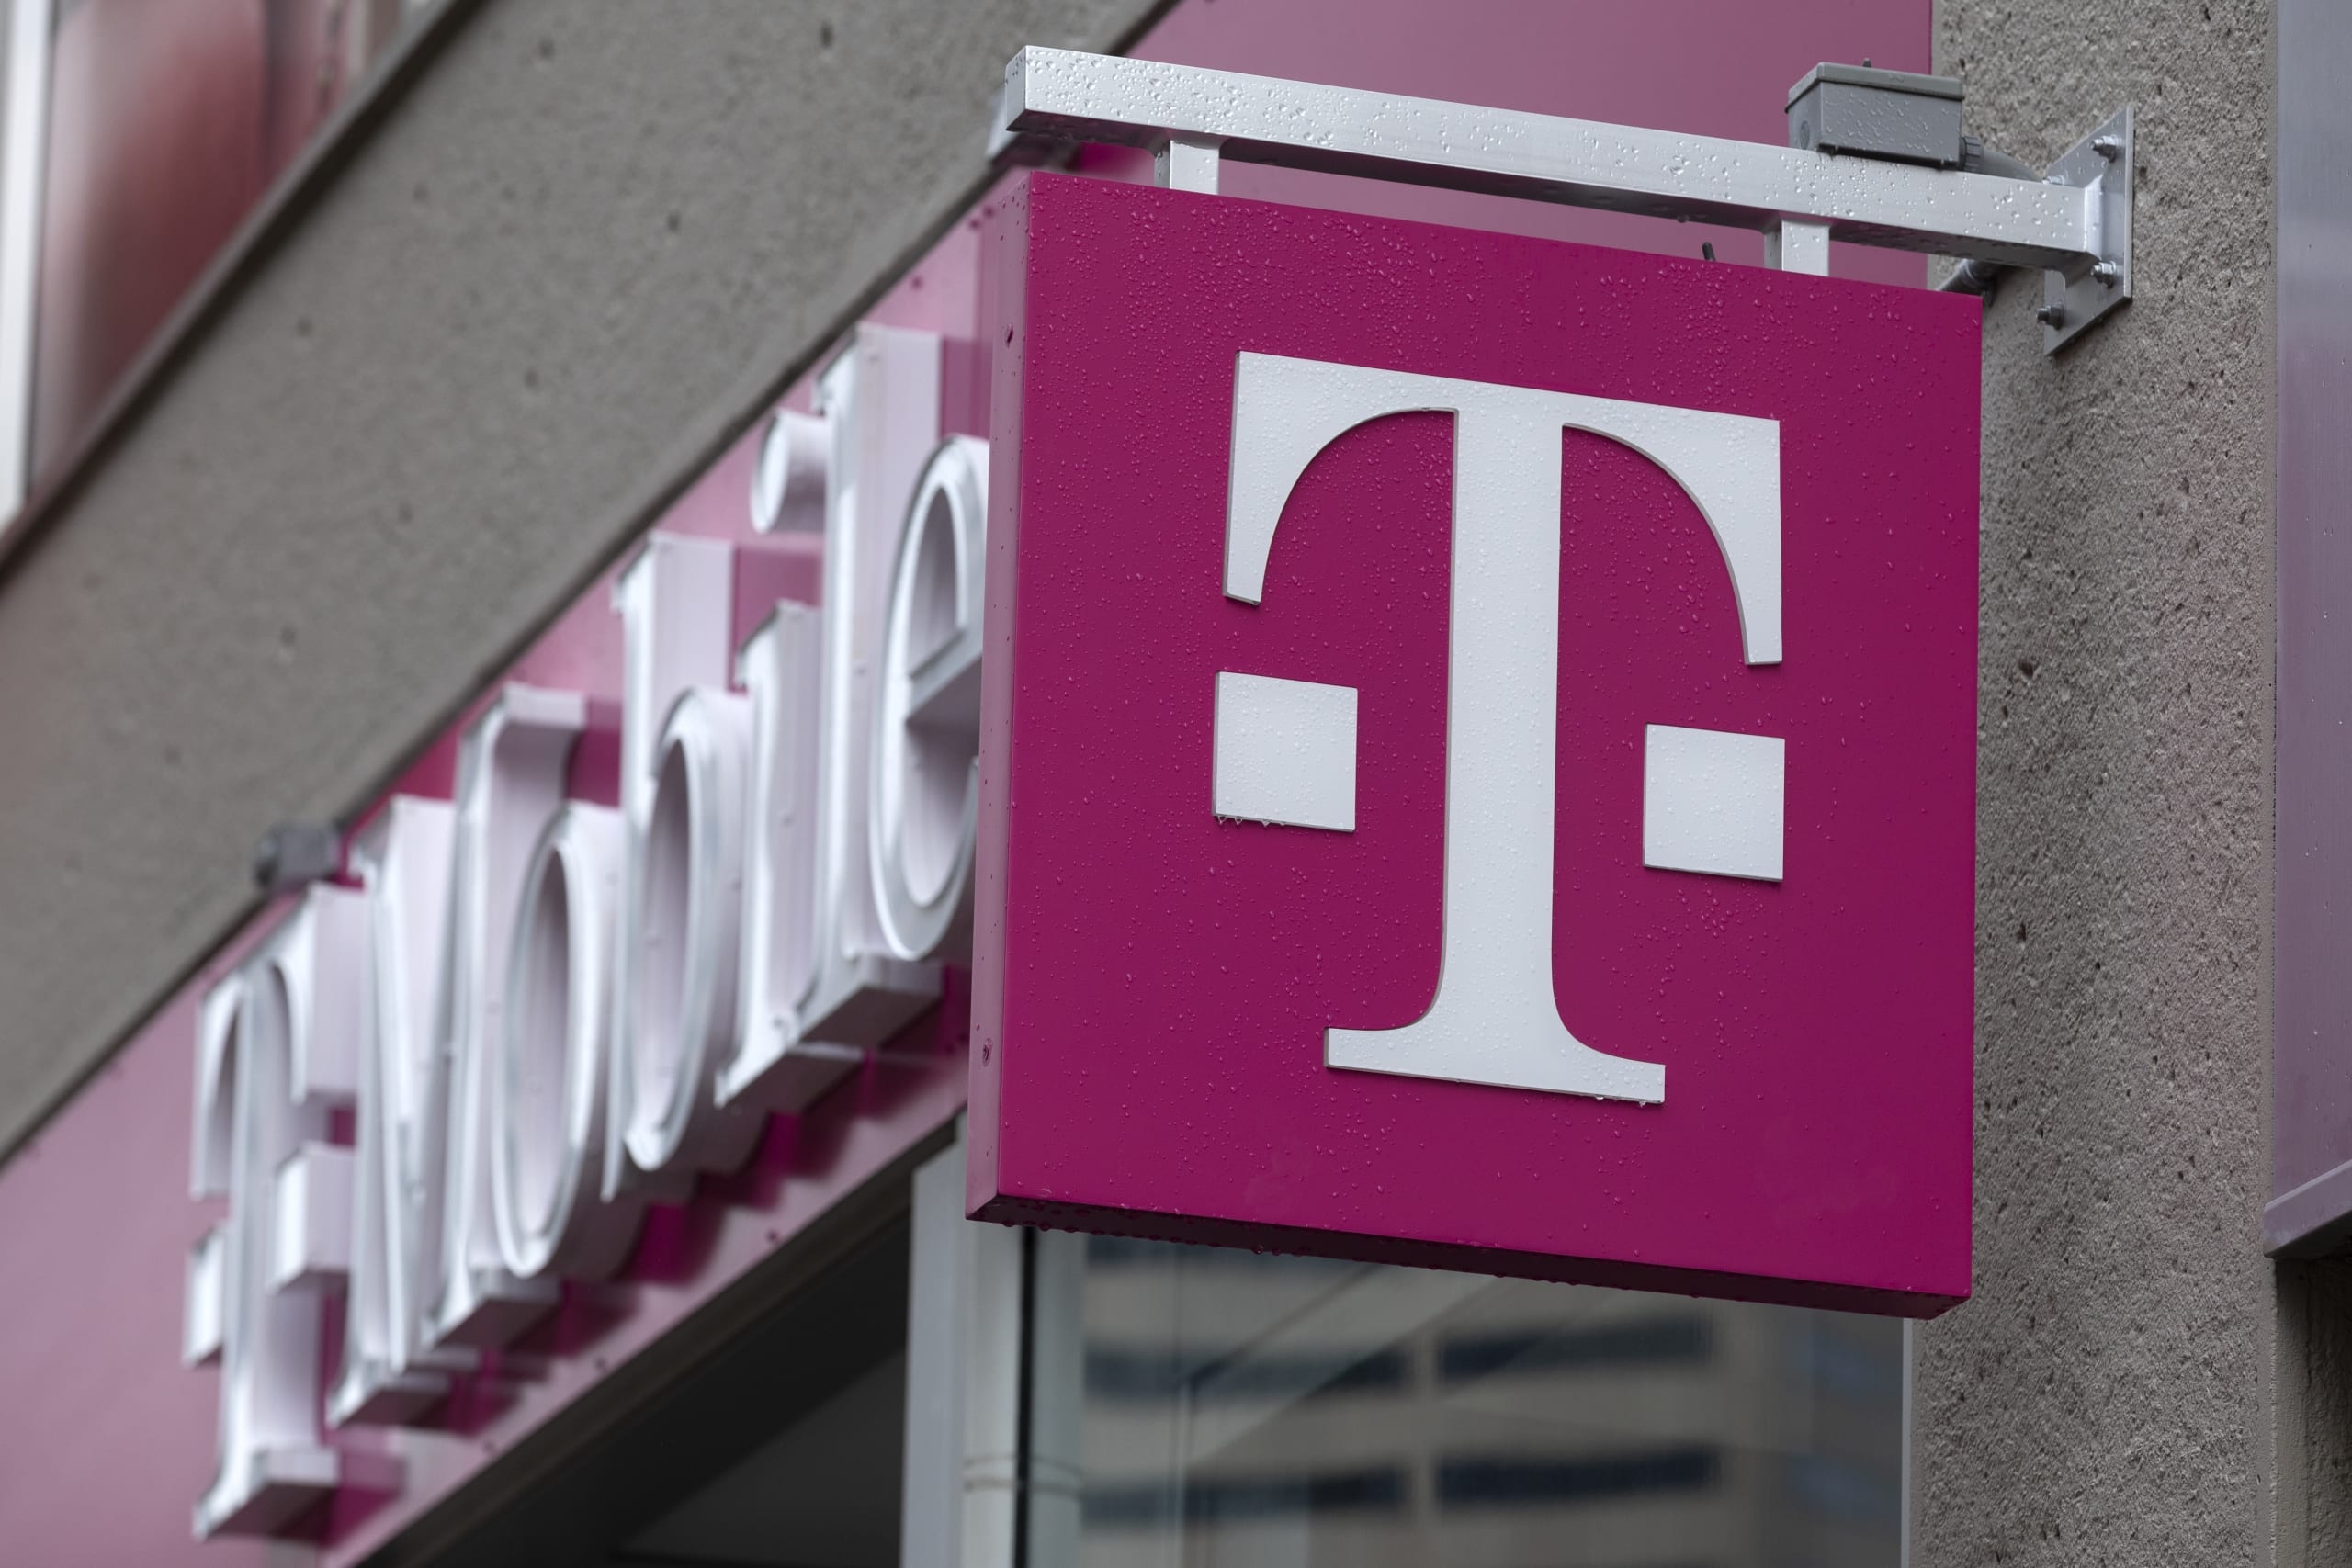 37 million T-Mobile customers had their personal info stolen, company reports